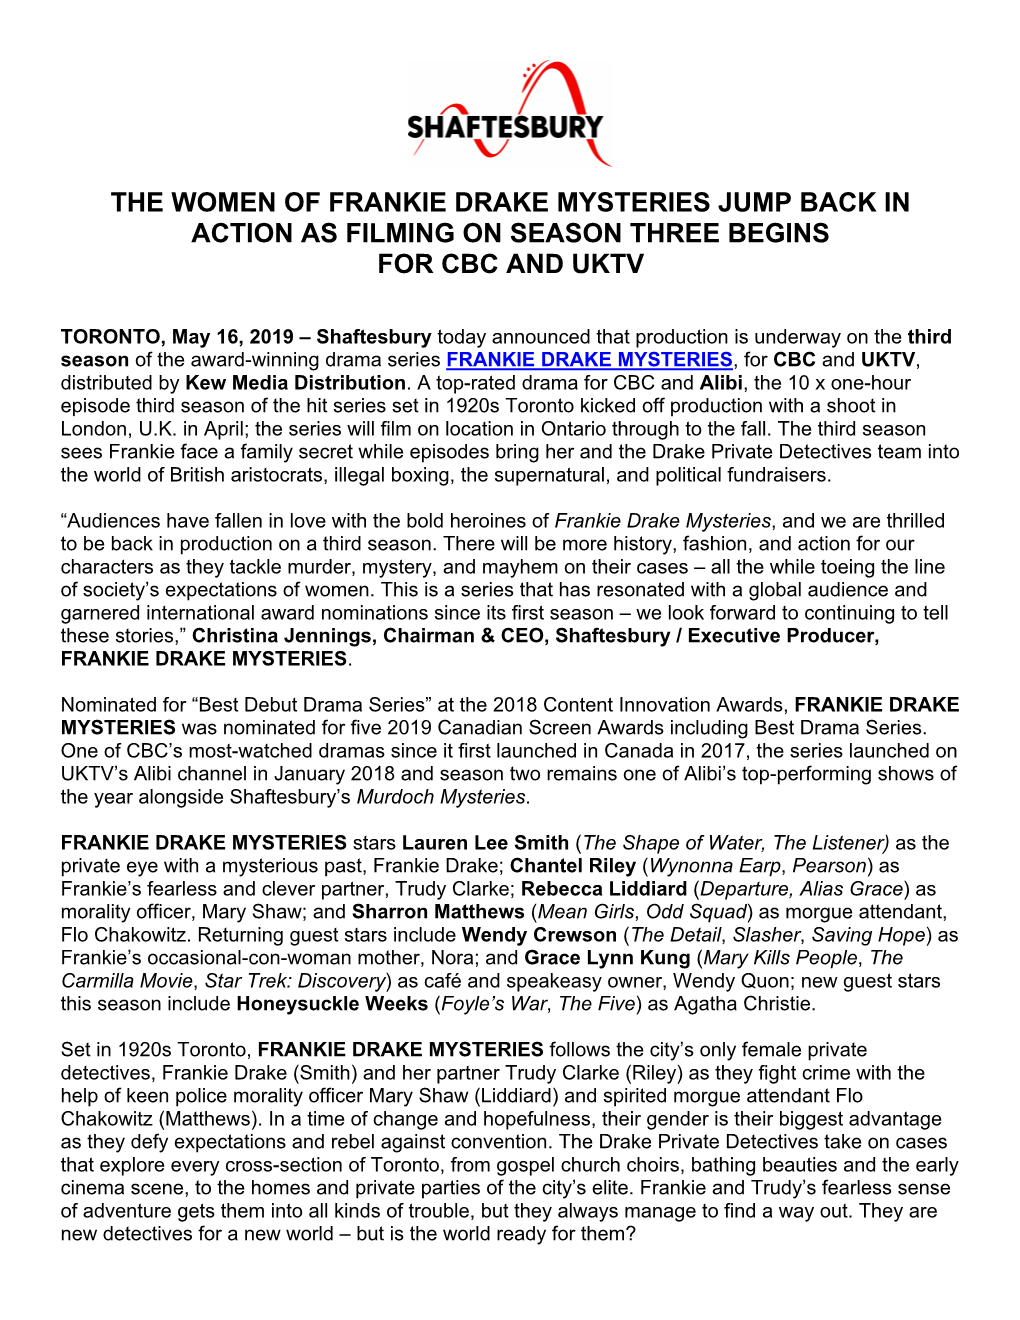 The Women of Frankie Drake Mysteries Jump Back in Action As Filming on Season Three Begins for Cbc and Uktv